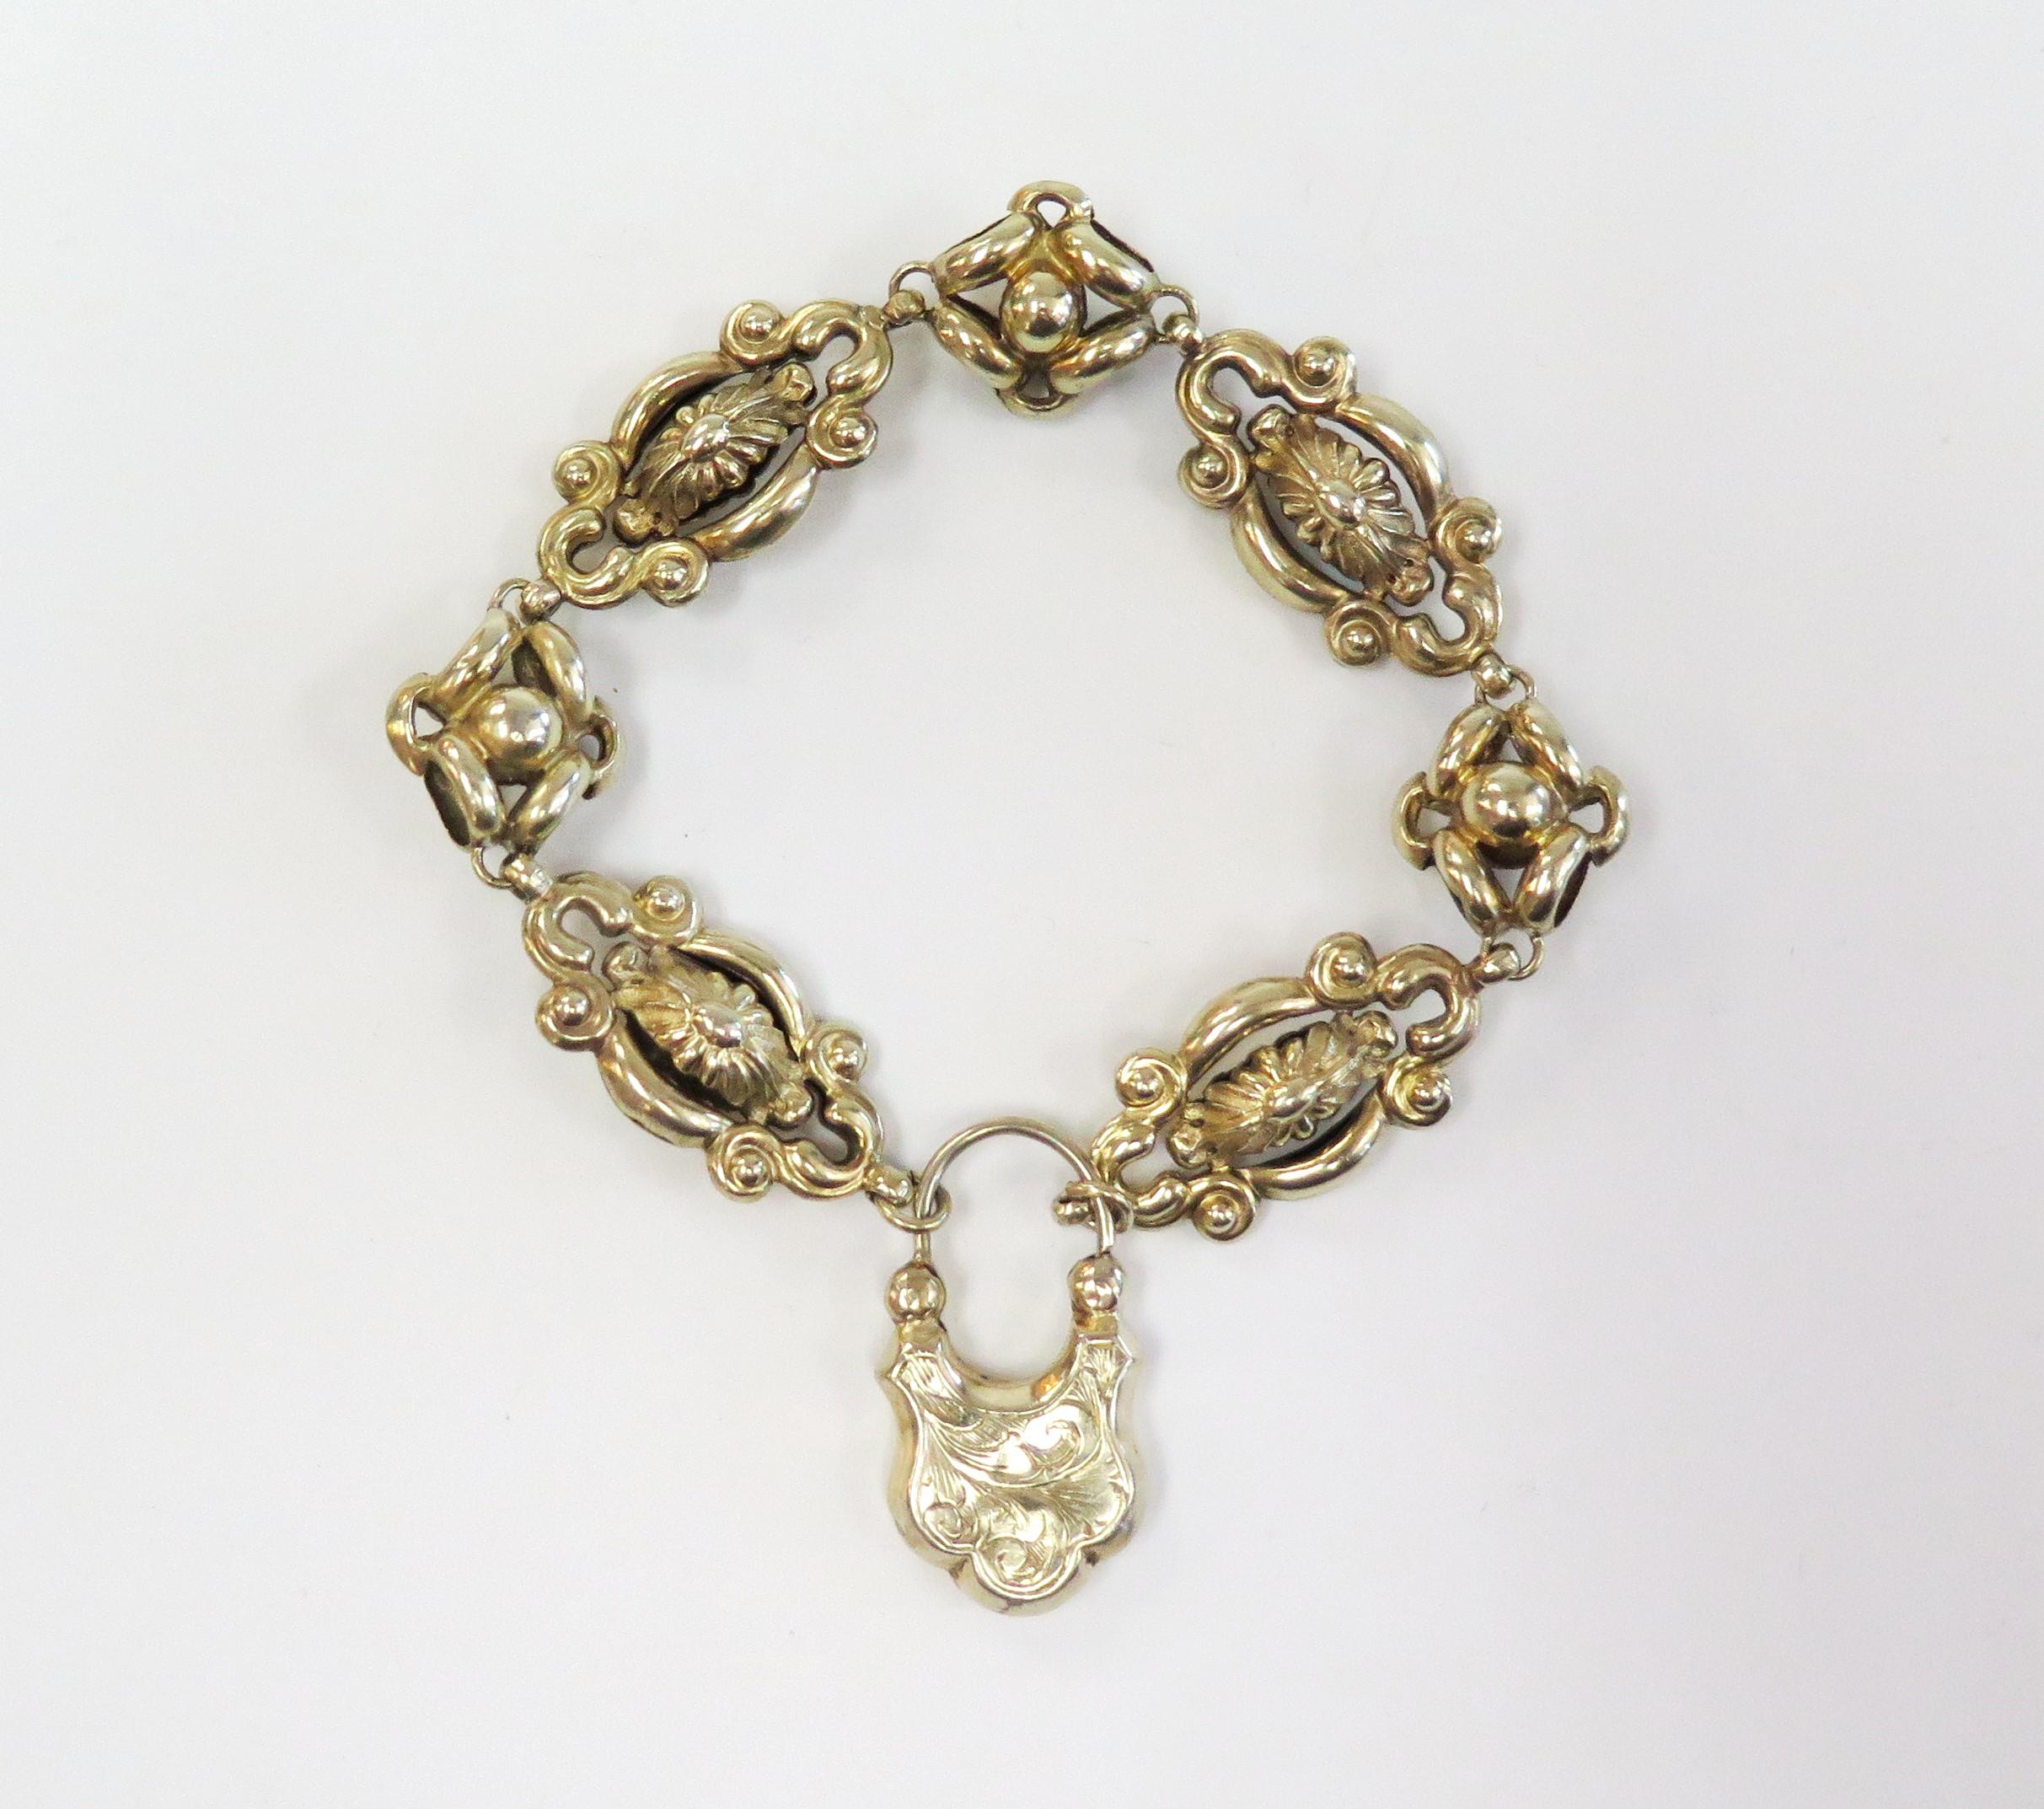 Very unusual Victorian Mourning Bracelet has puffed ornate links and a padlock clasp. One side of the clasp has a black 